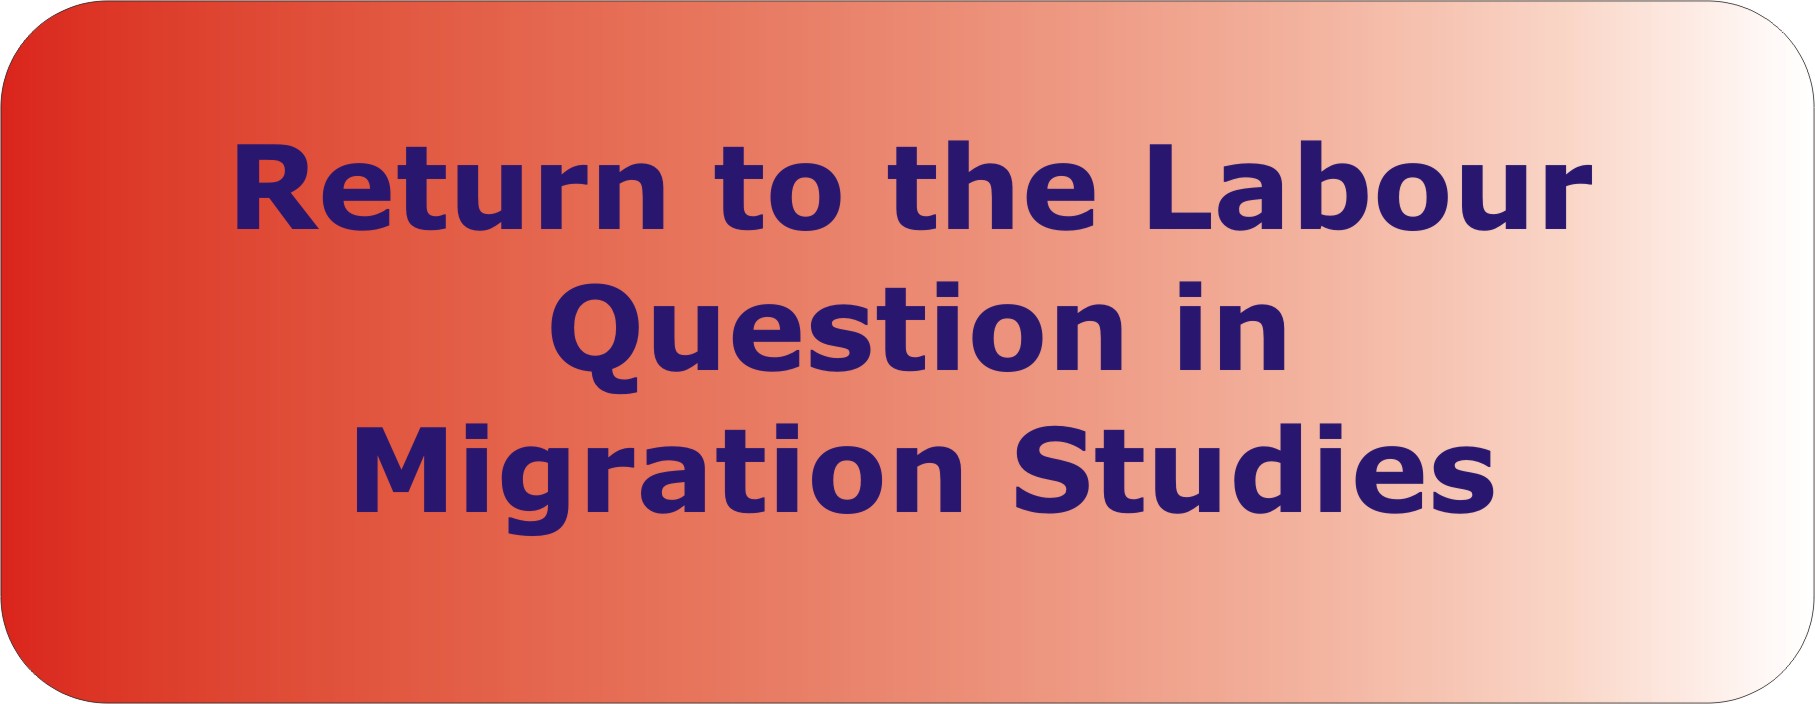 Return to the Labour Question in Migration Studies